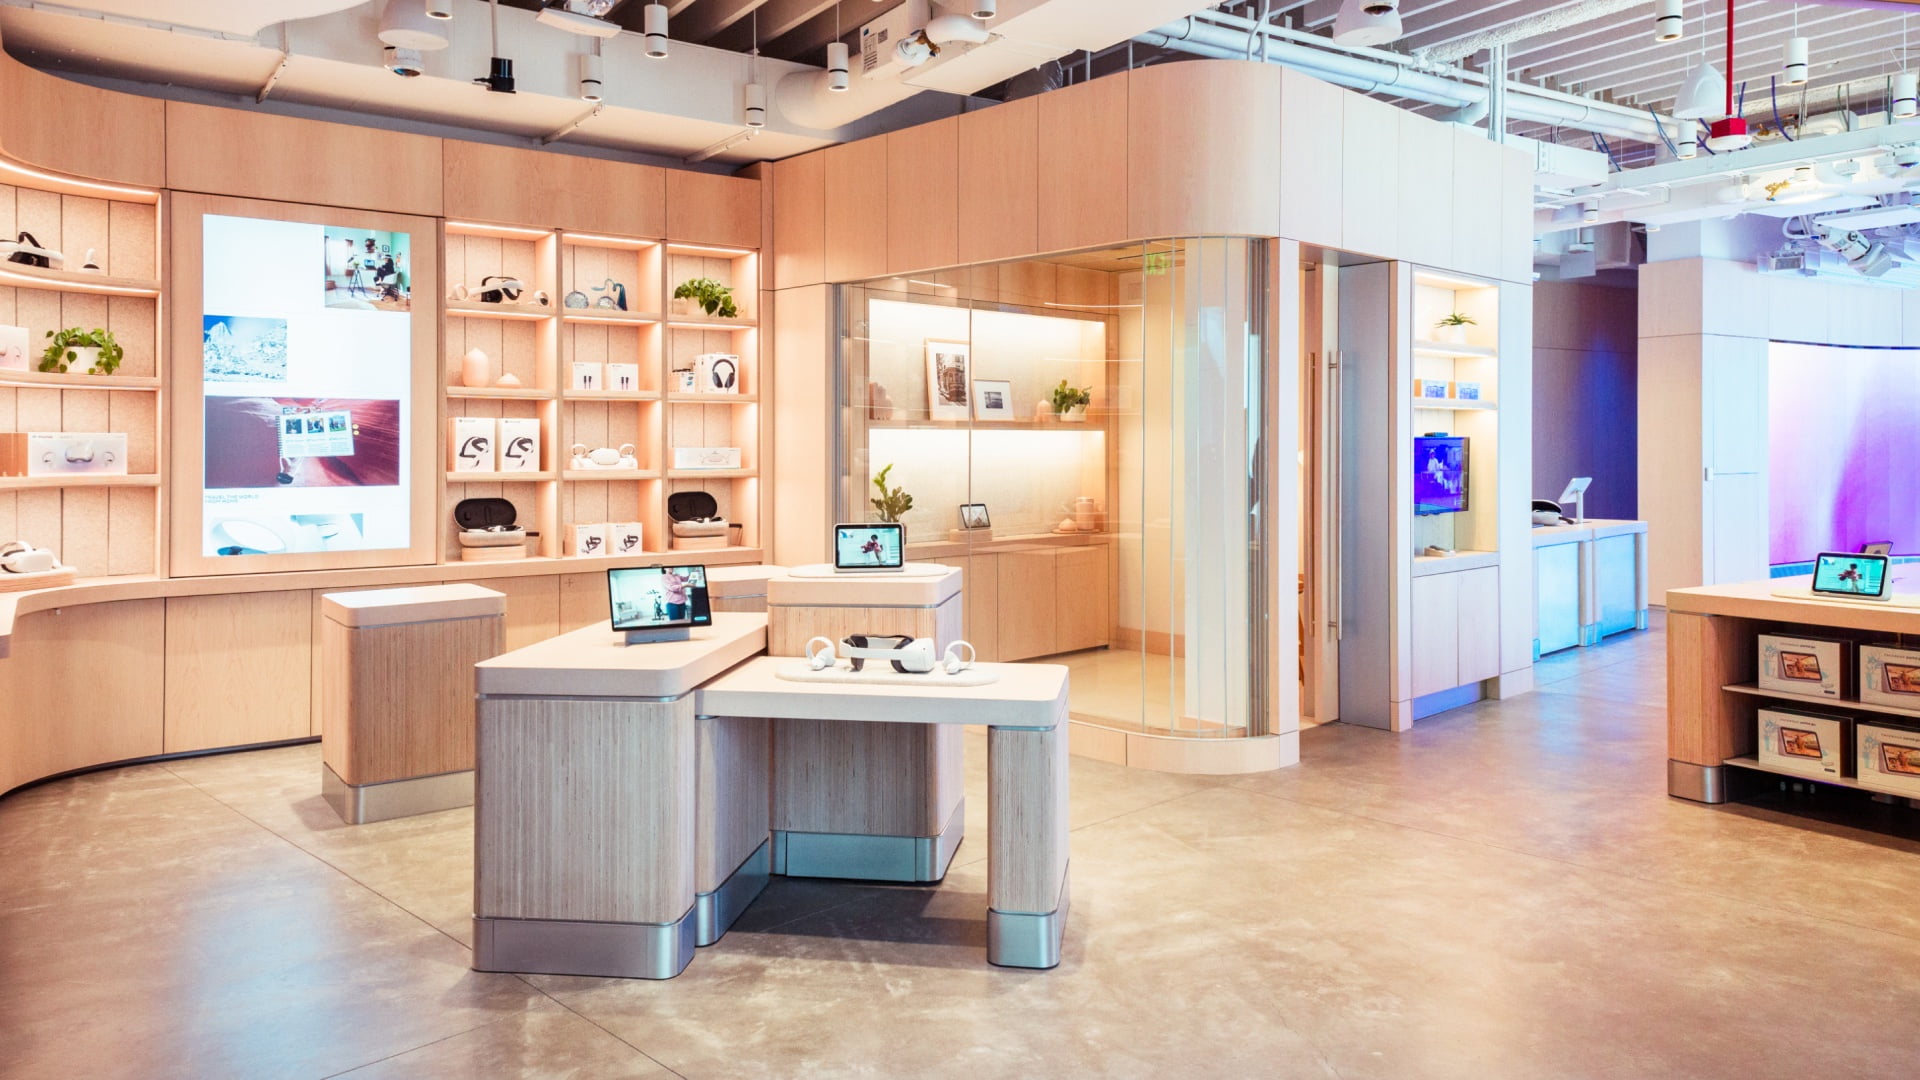 Demystifying the Metaverse: Meta opens its first hardware store